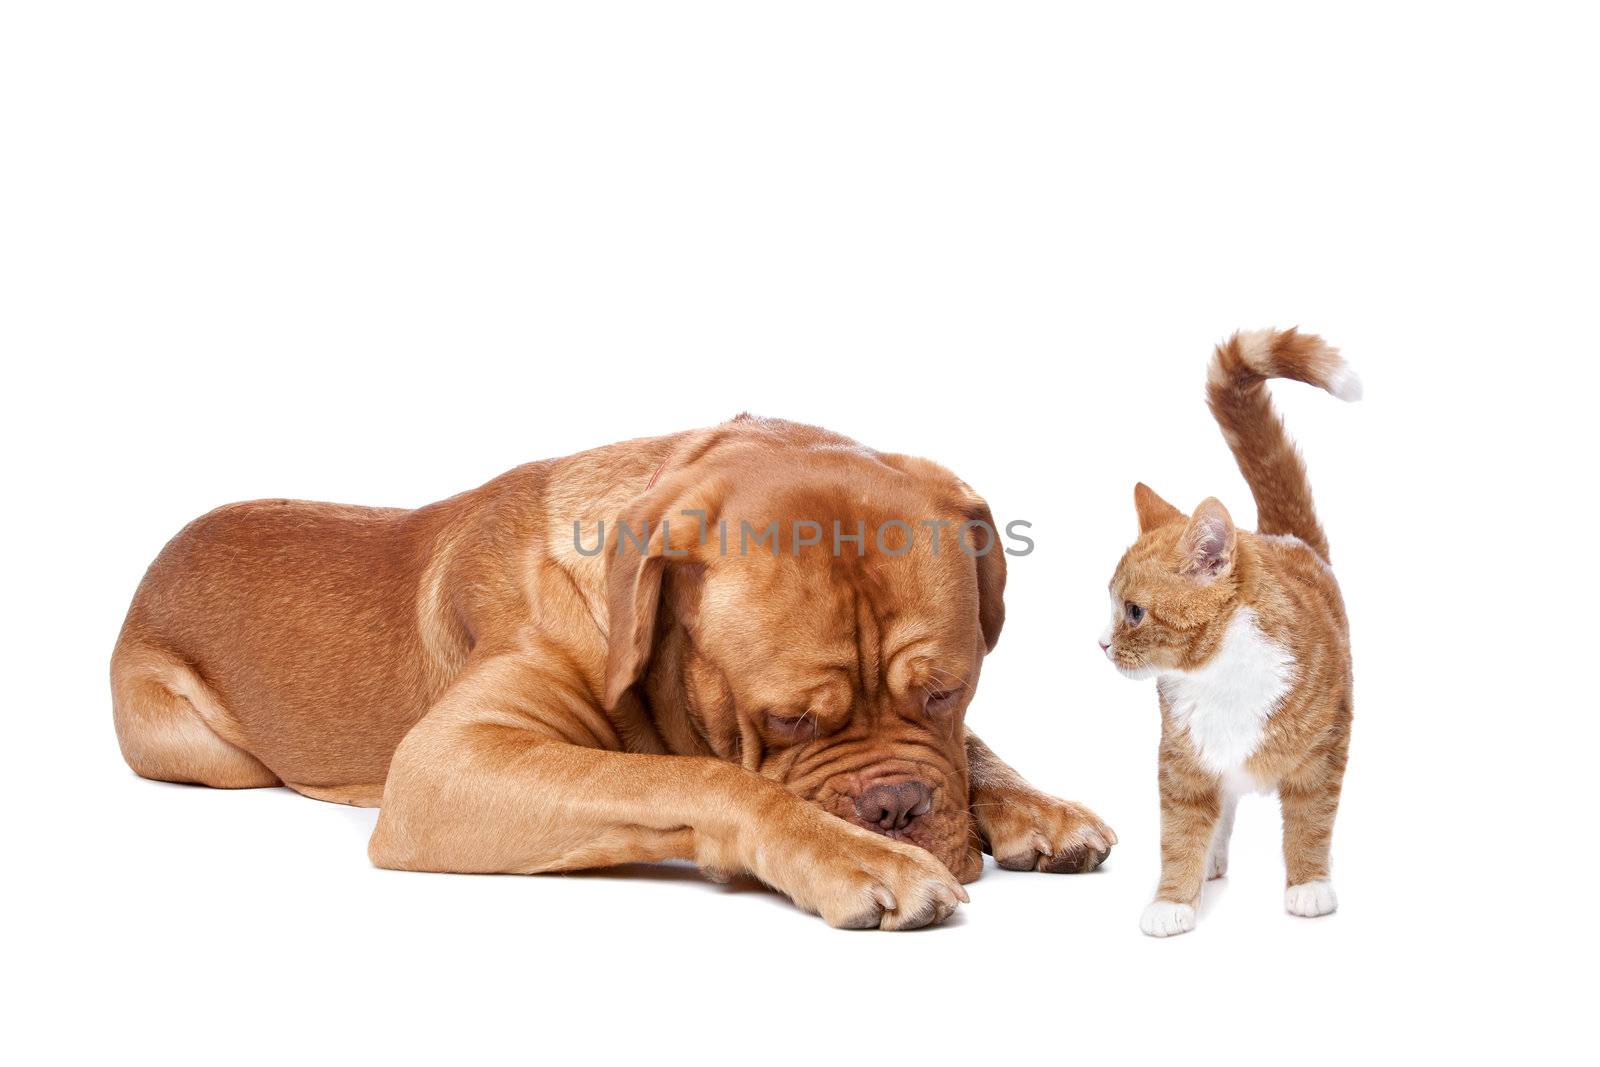 A big dog and a small cat in front of a white background